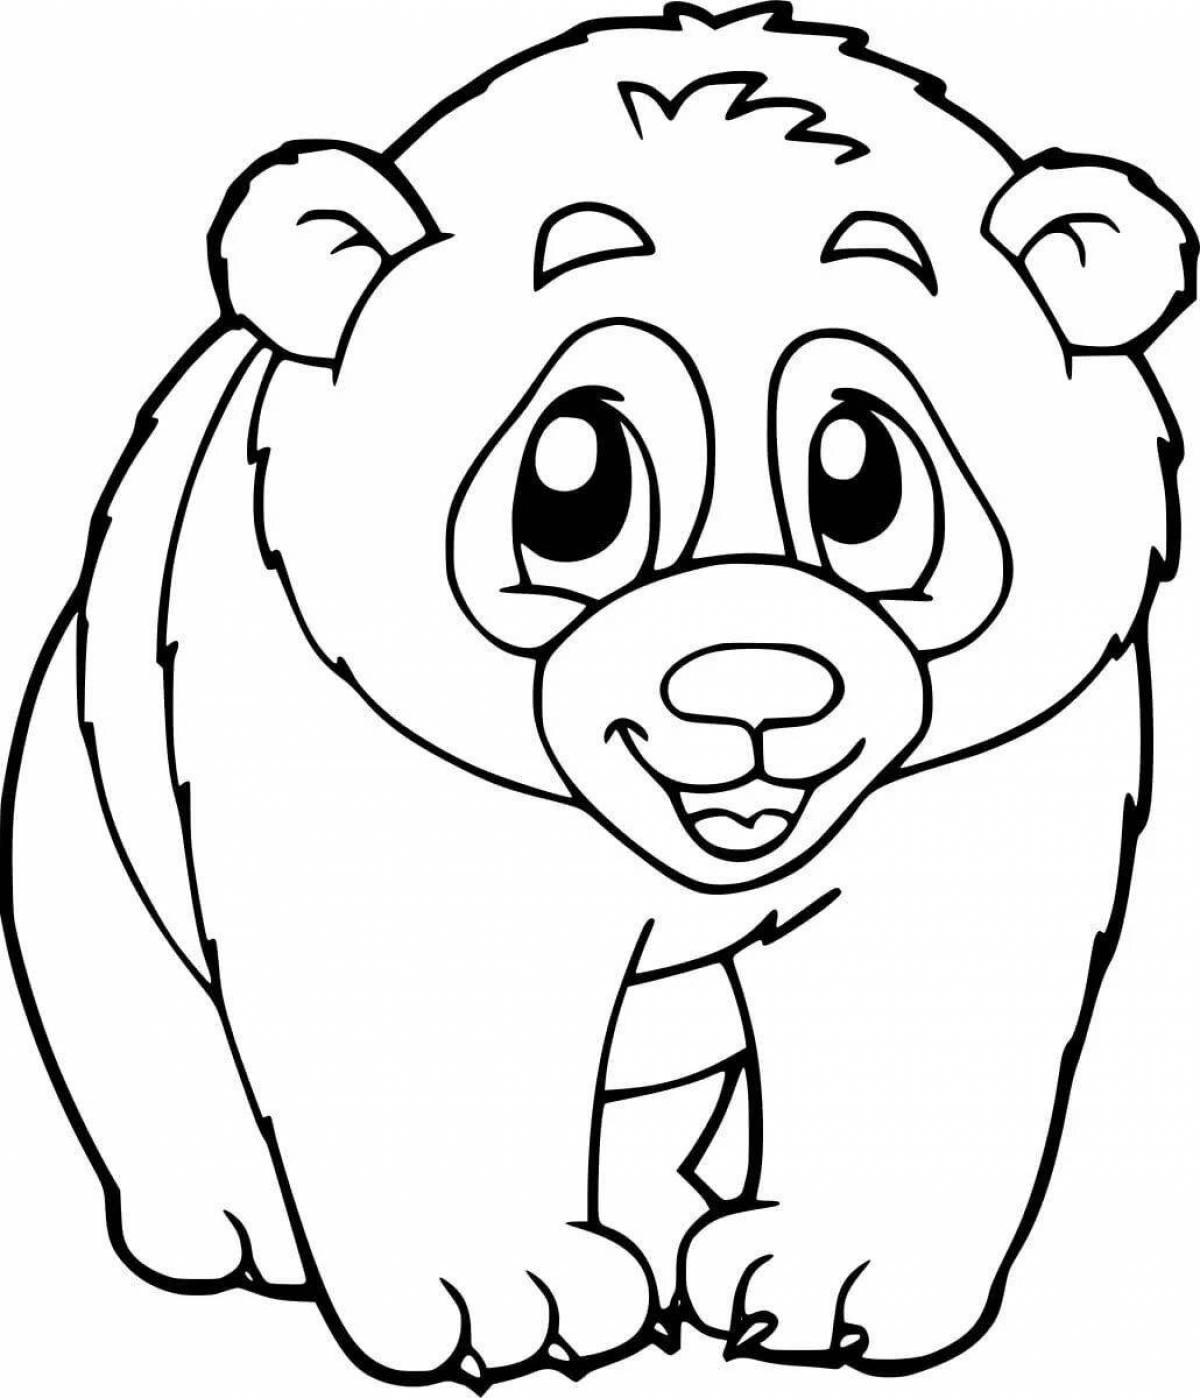 Adorable teddy bear coloring book for 6-7 year olds